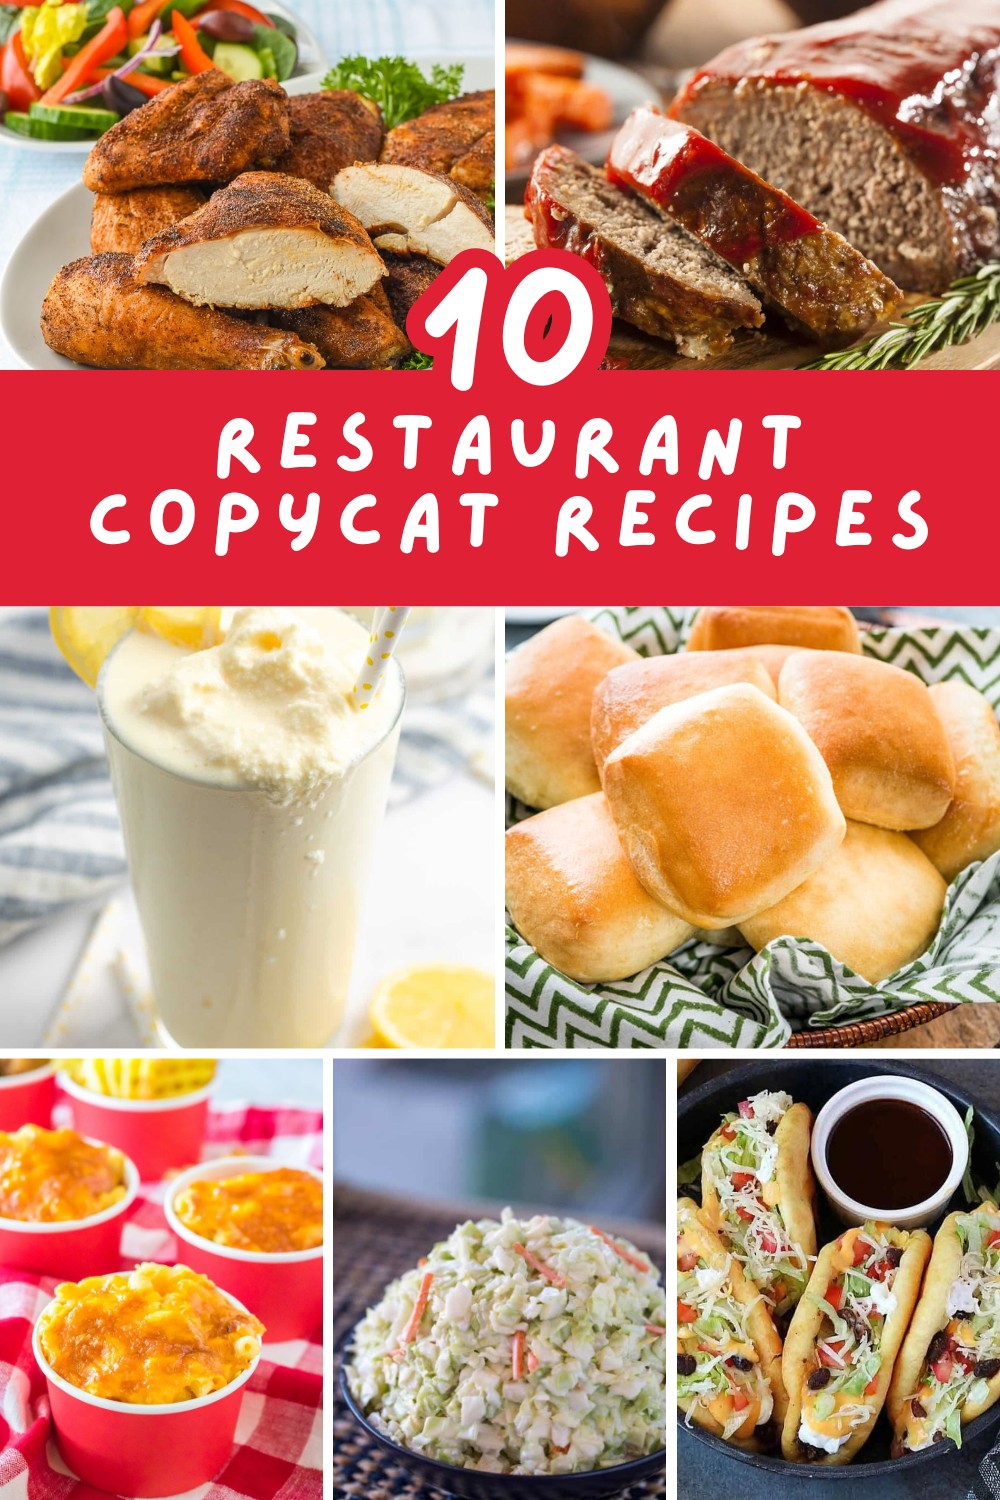 Bring the taste of your favorite restaurants to your kitchen with these top 10 copycat recipes! Enjoy Chick-fil-A’s Frosted Lemonade, Panda Express’s Chow Mein, Texas Roadhouse Rolls, and more. Perfect for satisfying those cravings! 🍽️🌟 #HomeCooking #Yummy

